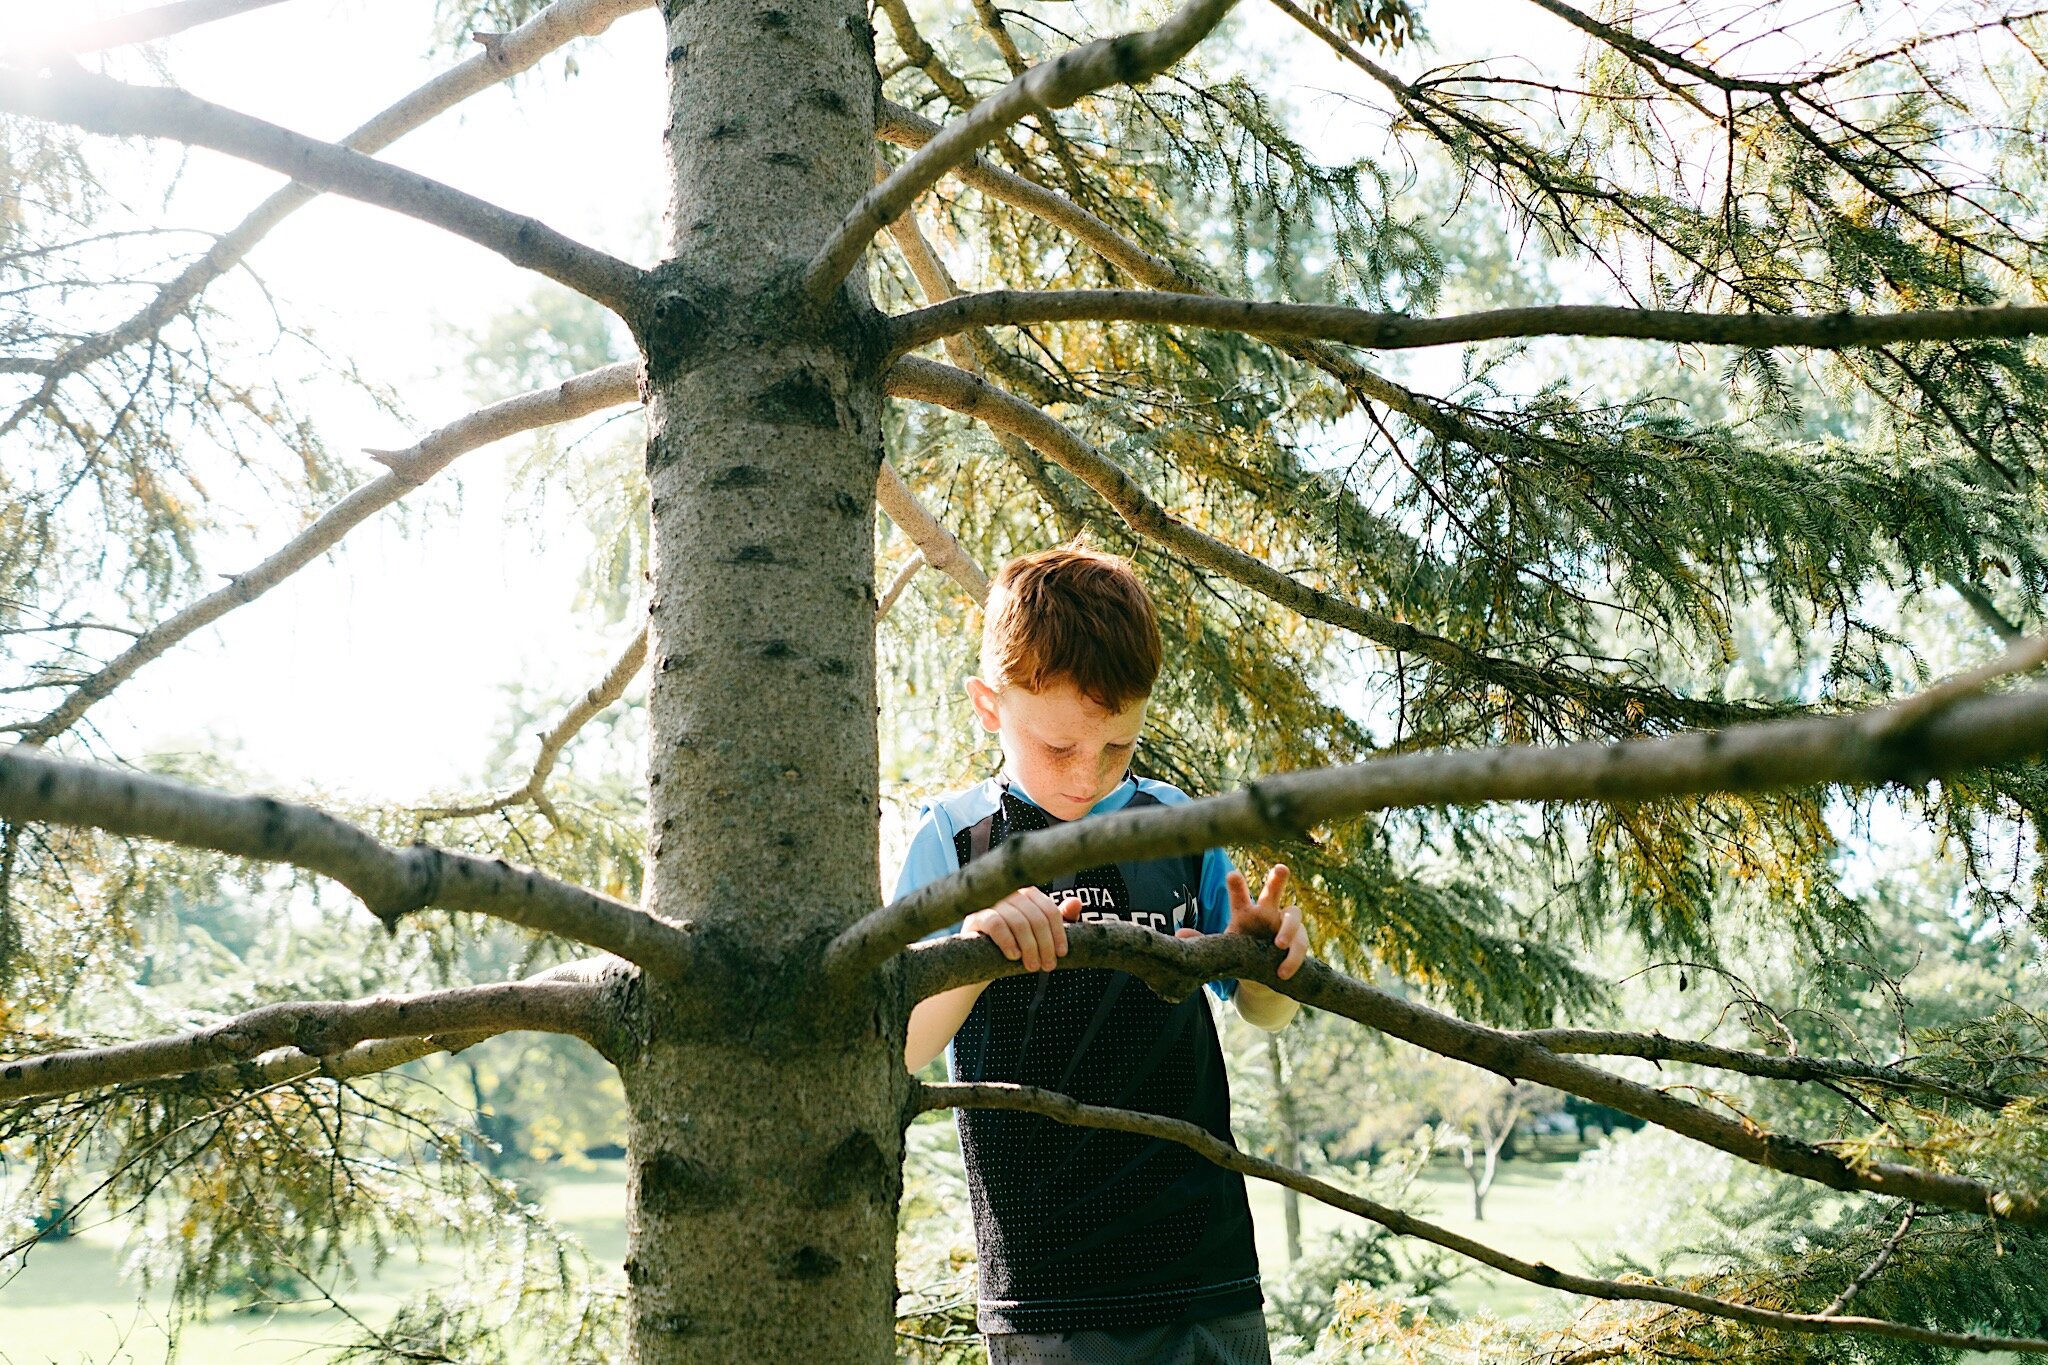 Photograph of a young boy climbing a tree at a public park in Saint Paul, Minnesota